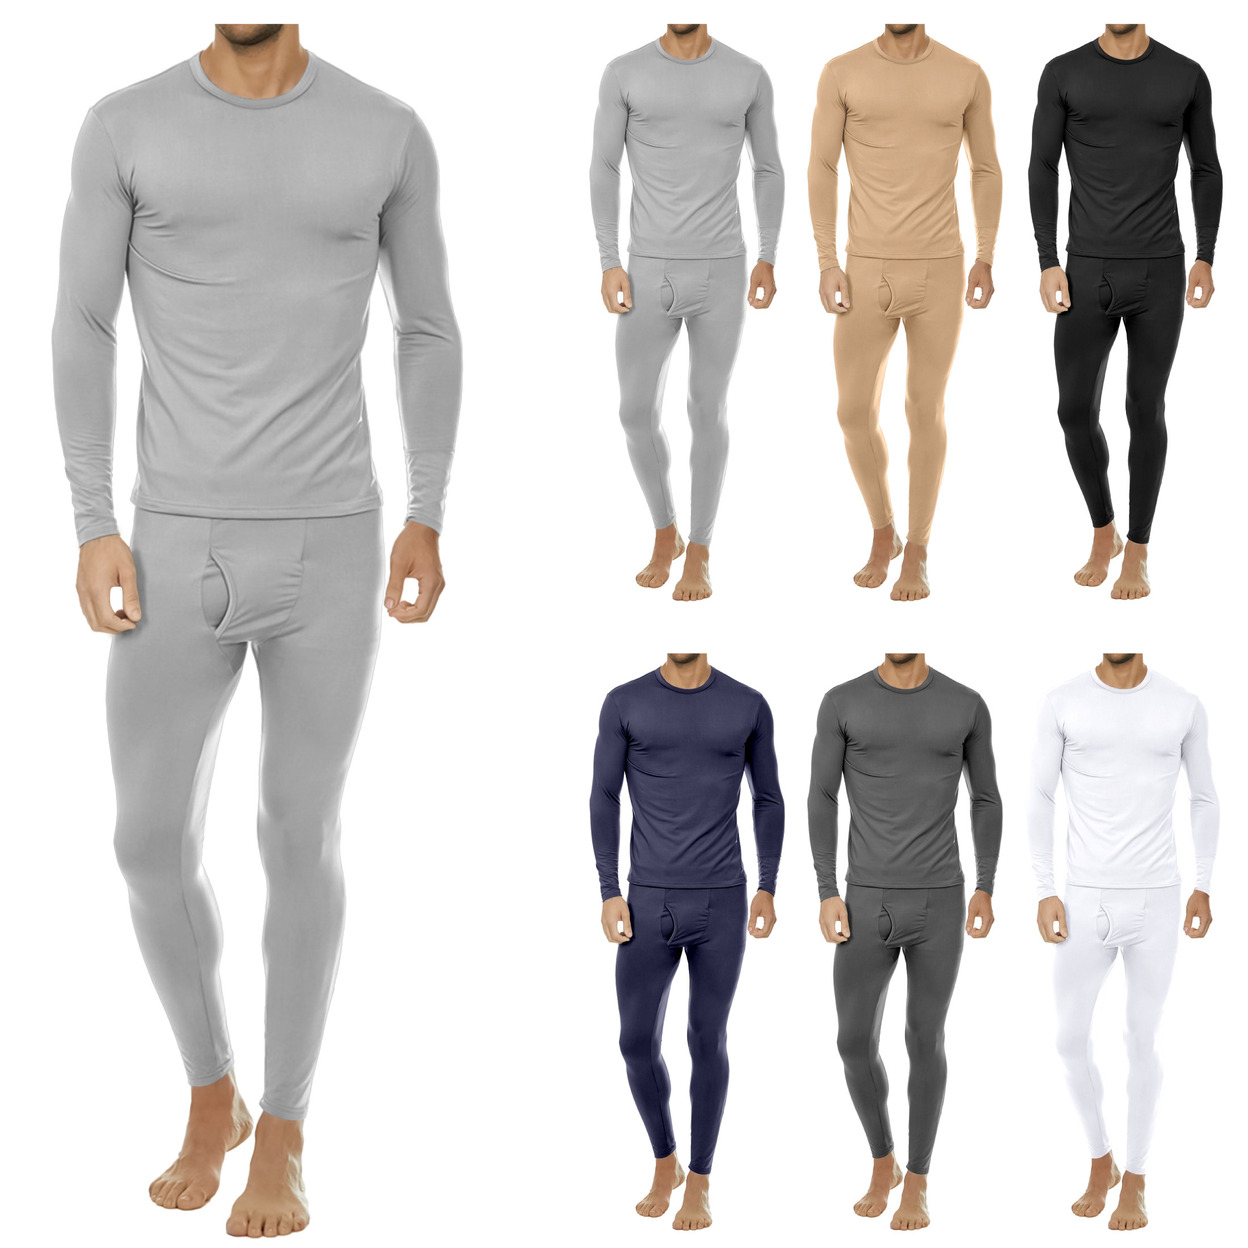 2-Sets: Men's Winter Warm Fleece Lined Thermal Underwear Set For Cold Weather - Black&white, Xx-large